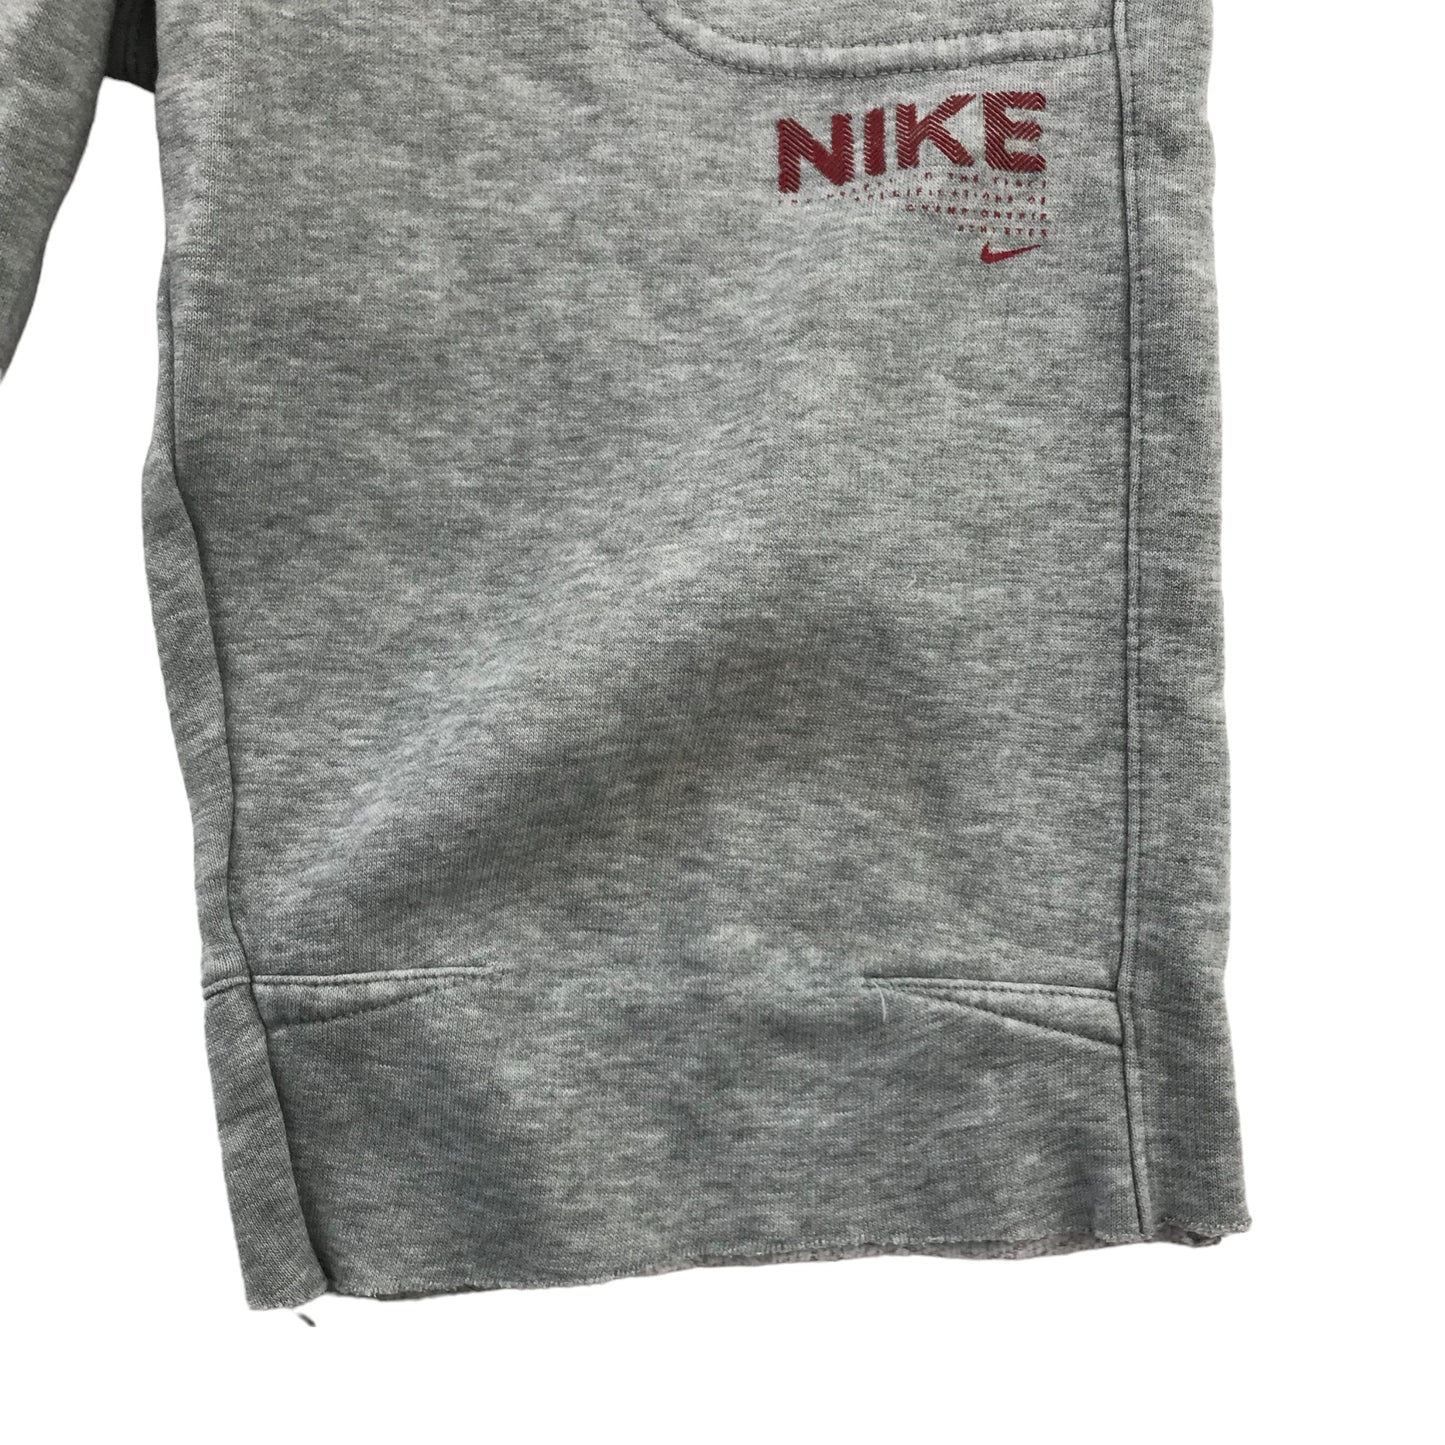 Nike Shorts Age 7 Grey Jersey Style Sporty with Logo